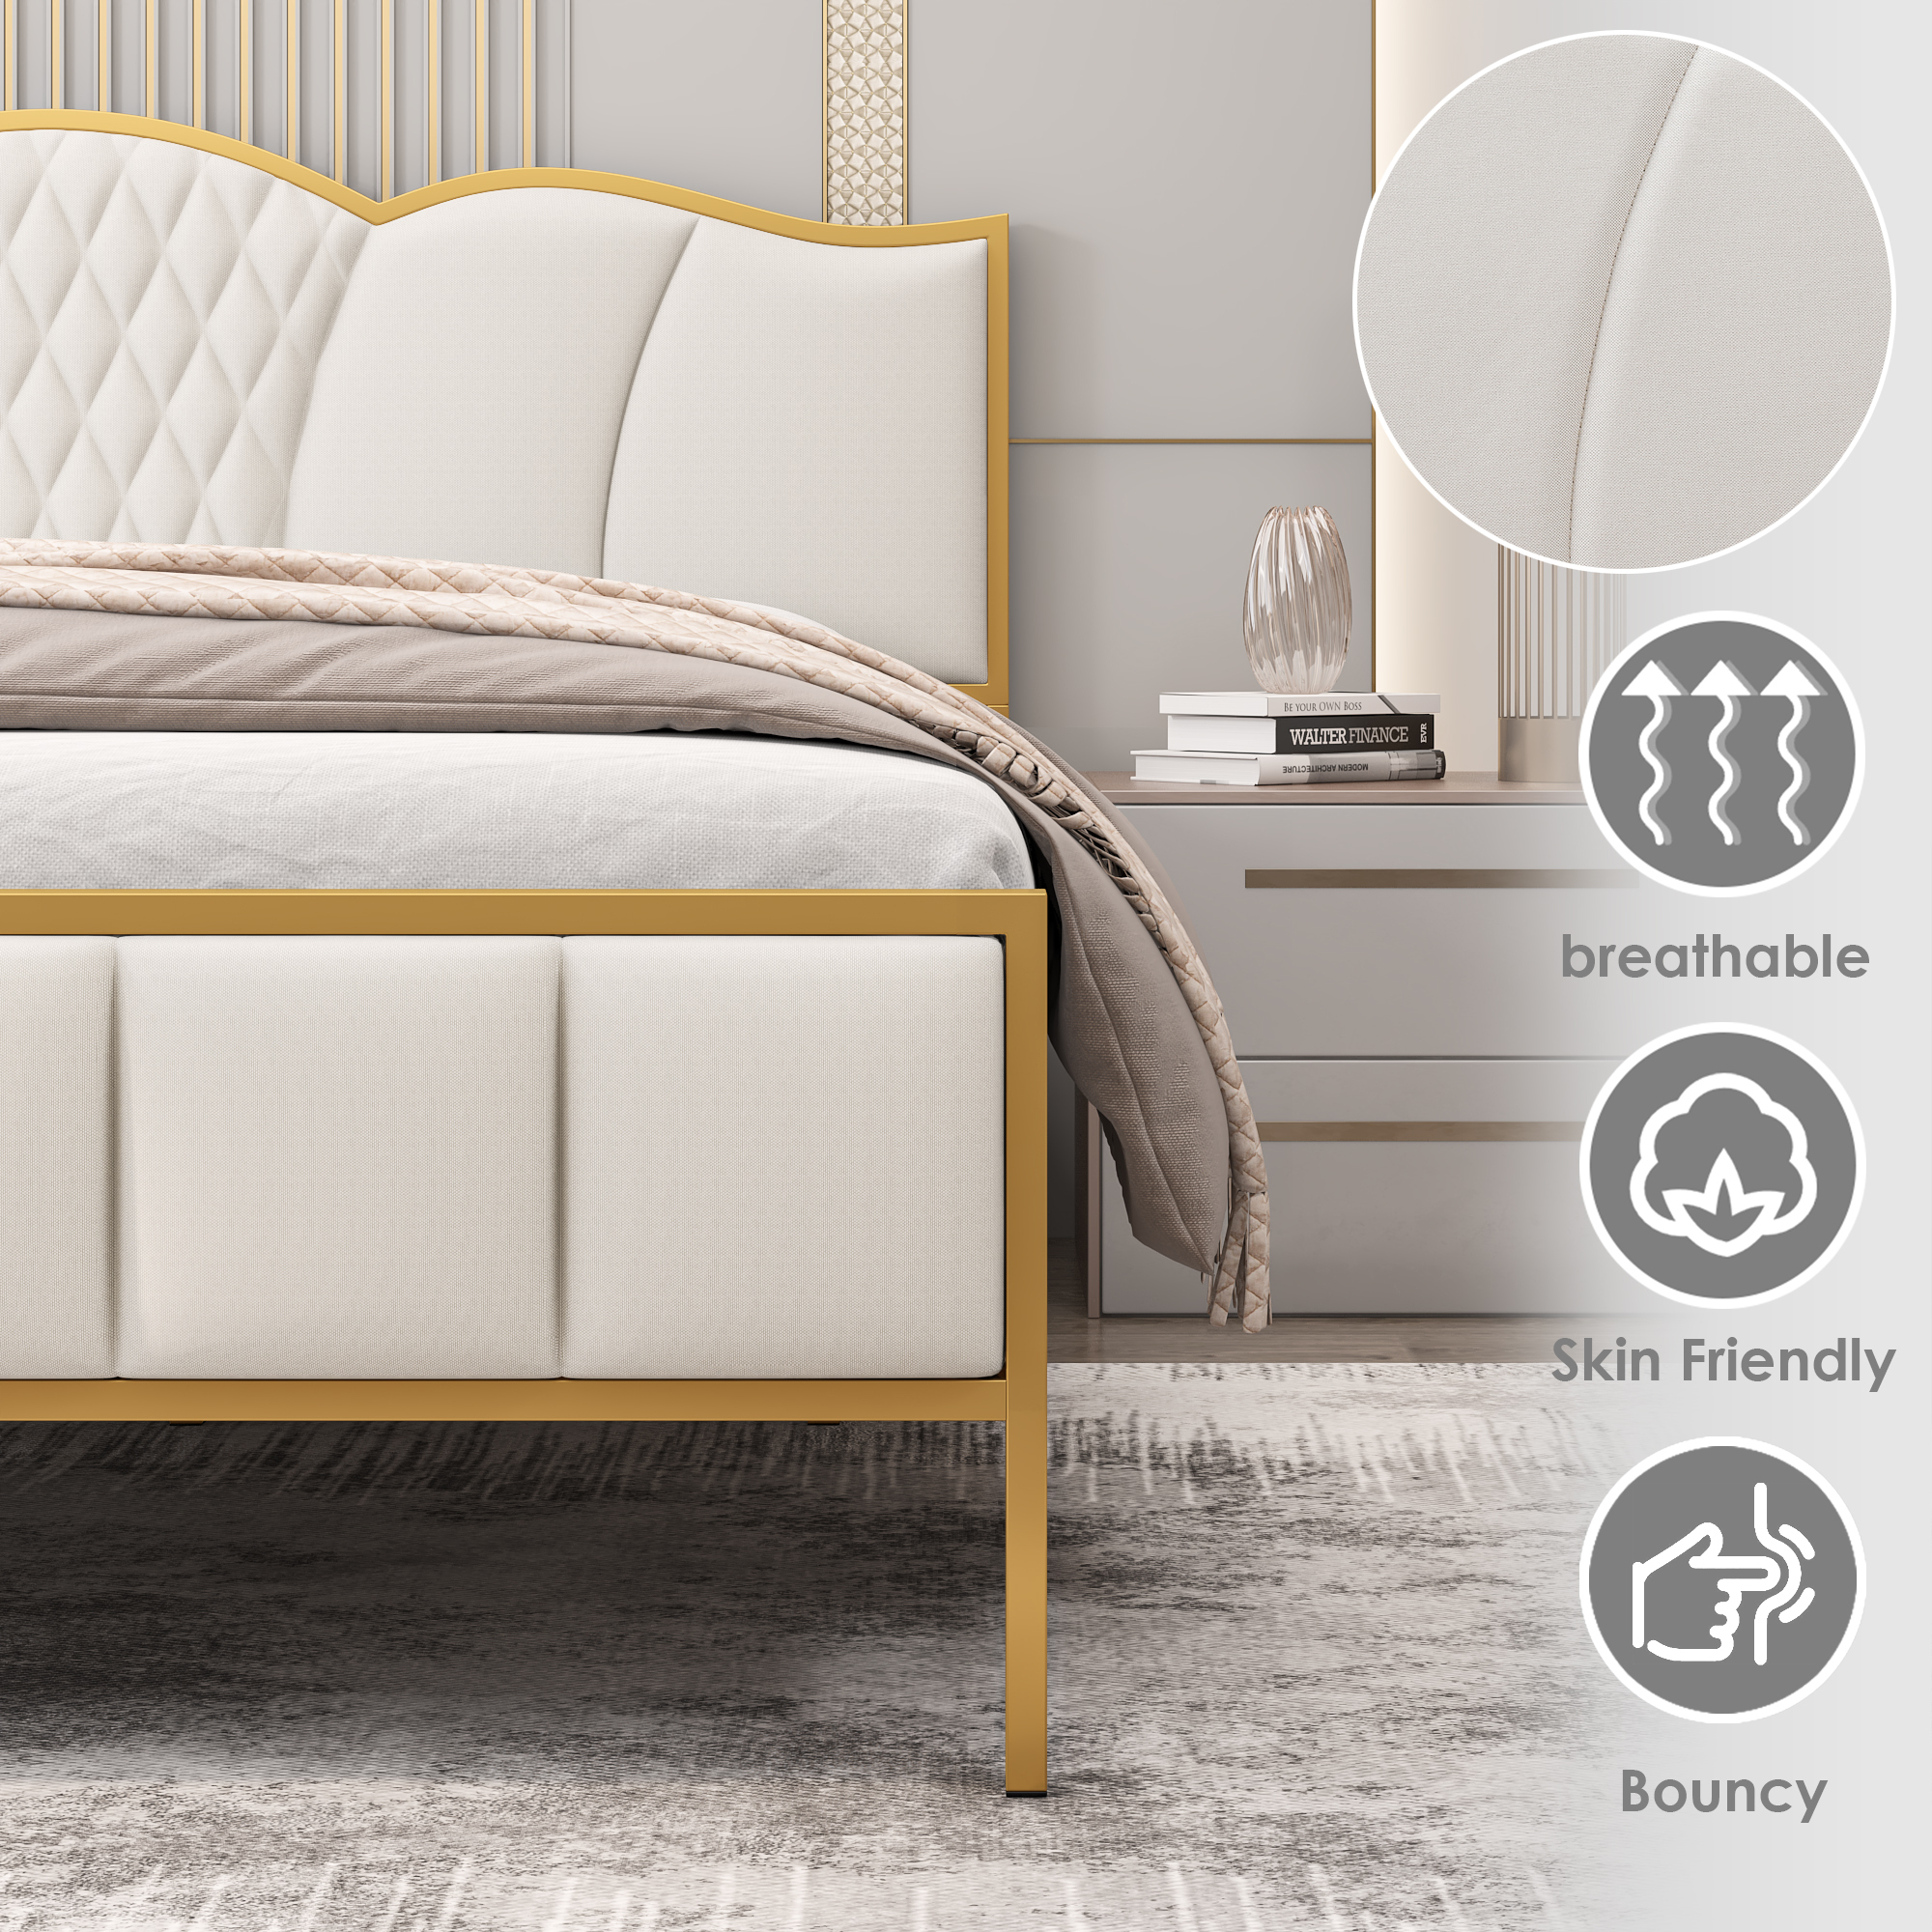 Homfa King Size Metal Bed Frame, Modern Linen Fabric Upholstered Platform Bed Frame with Tufted Headboard, Beige and Gold - image 3 of 10